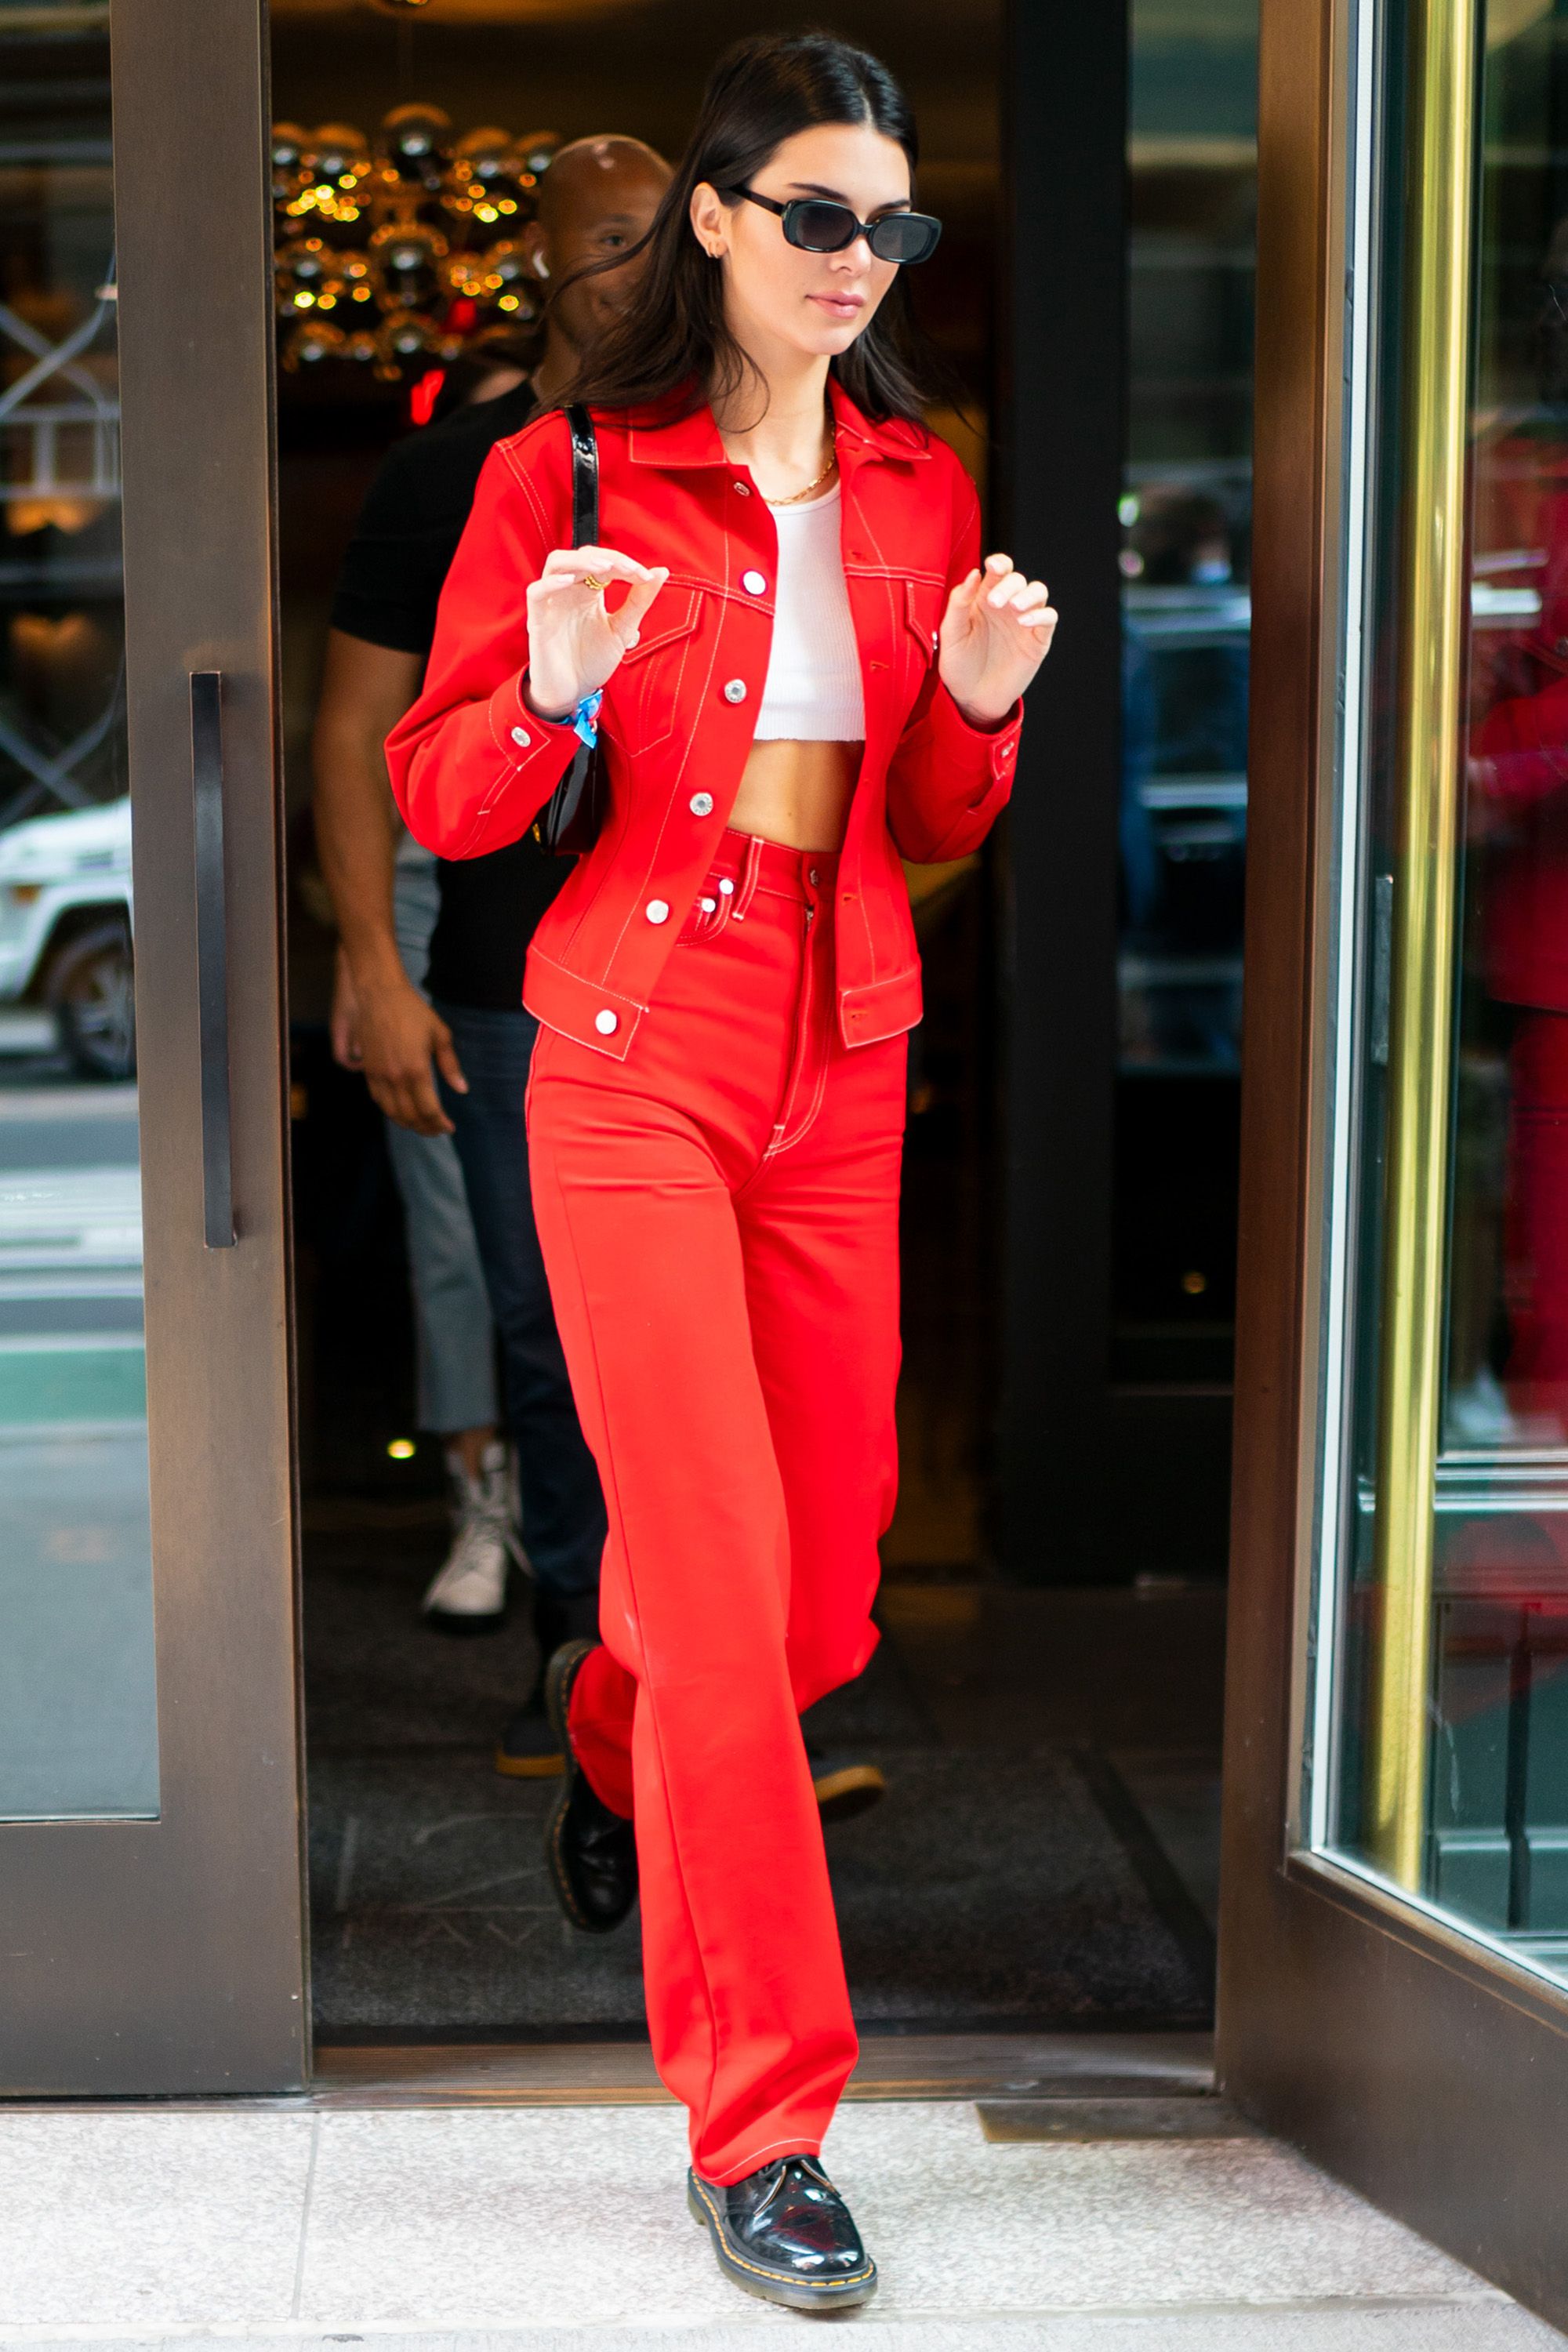 Kendall Jenner Style - Kendall Jenner's ...